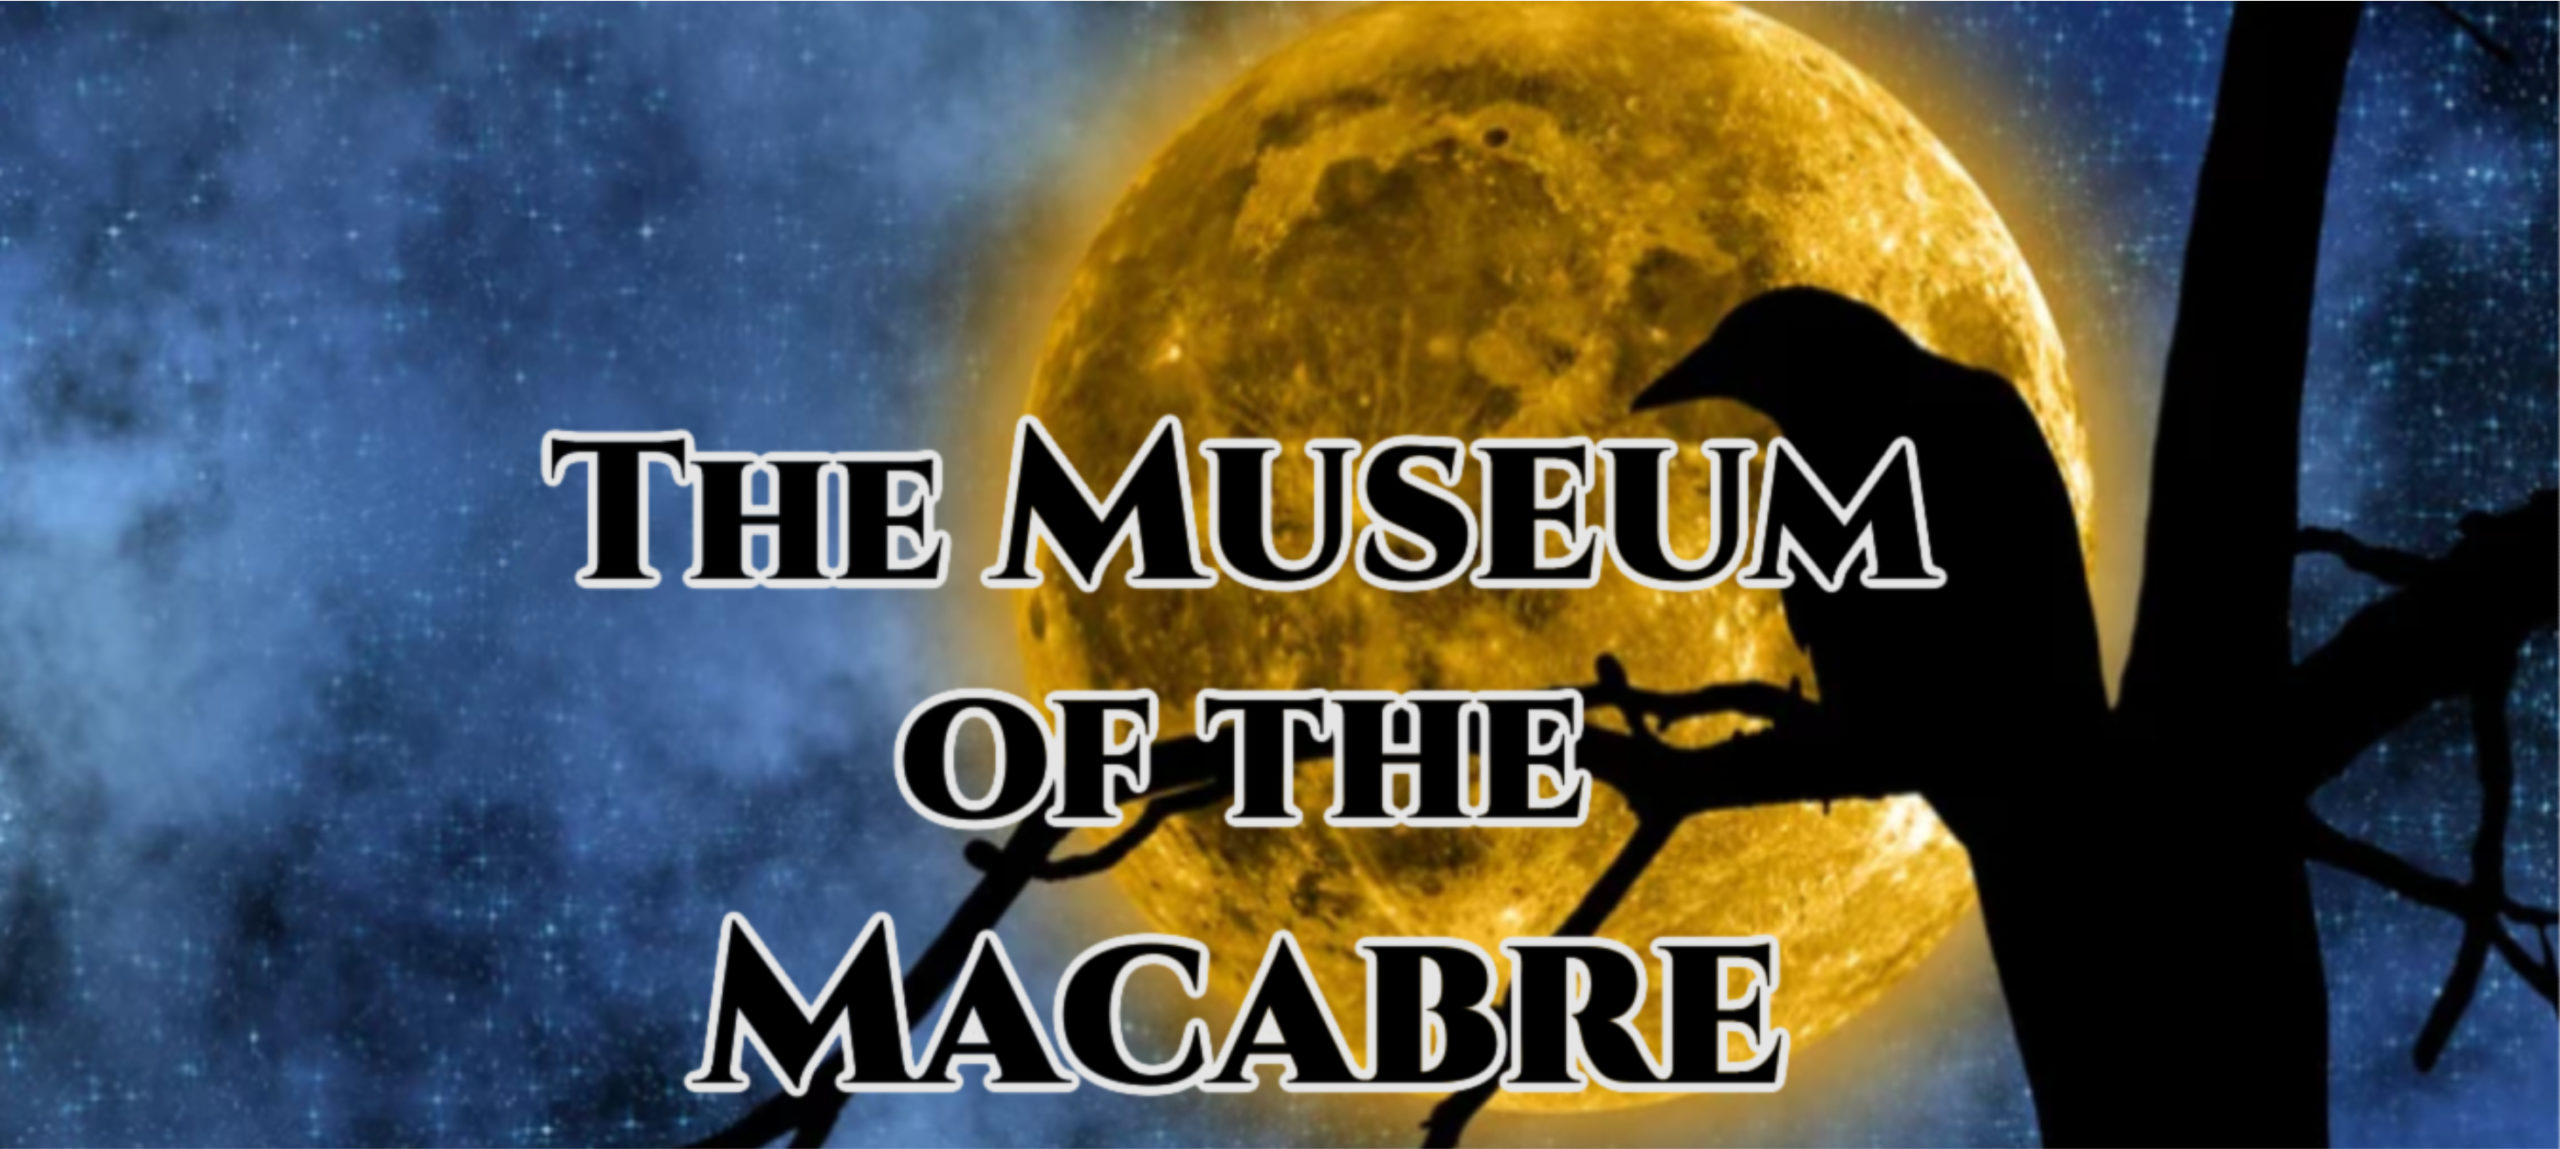 Museum of the Macabre